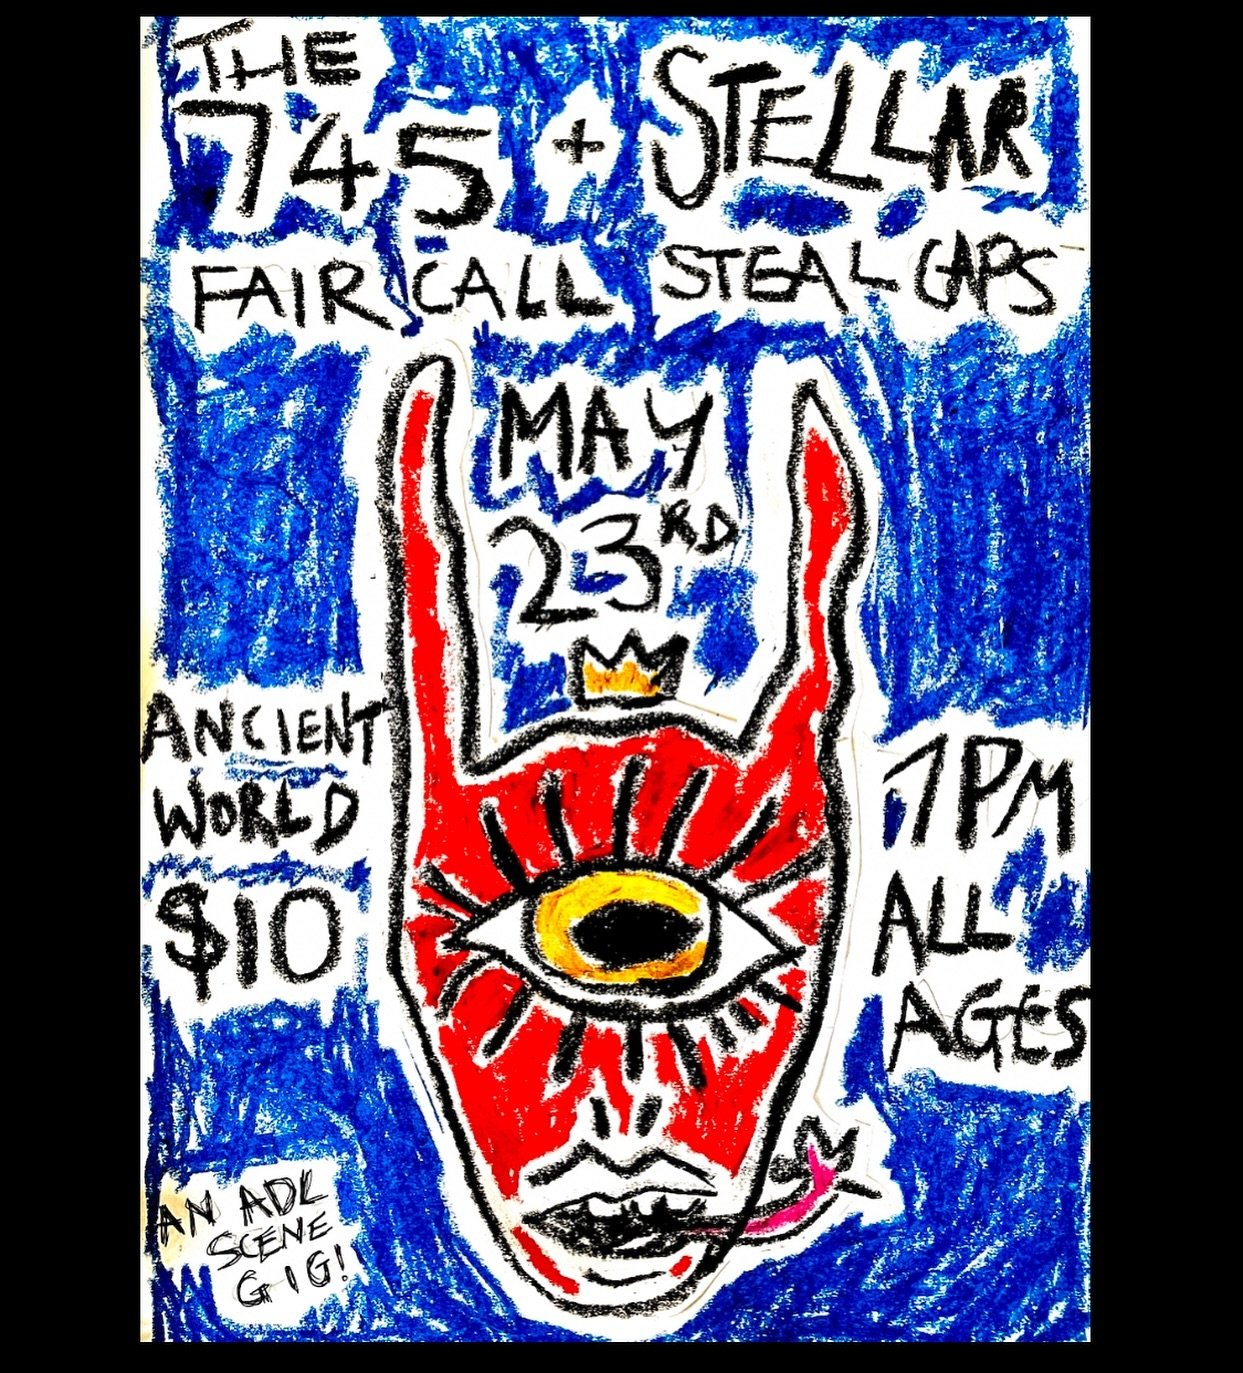 👹NEXT GIG👹

all ages PUNK show at ANCIENT world may TWENTY THIRD for TEN DOLLARS yeah SEVEN PM 🤘

Link in BIO !!